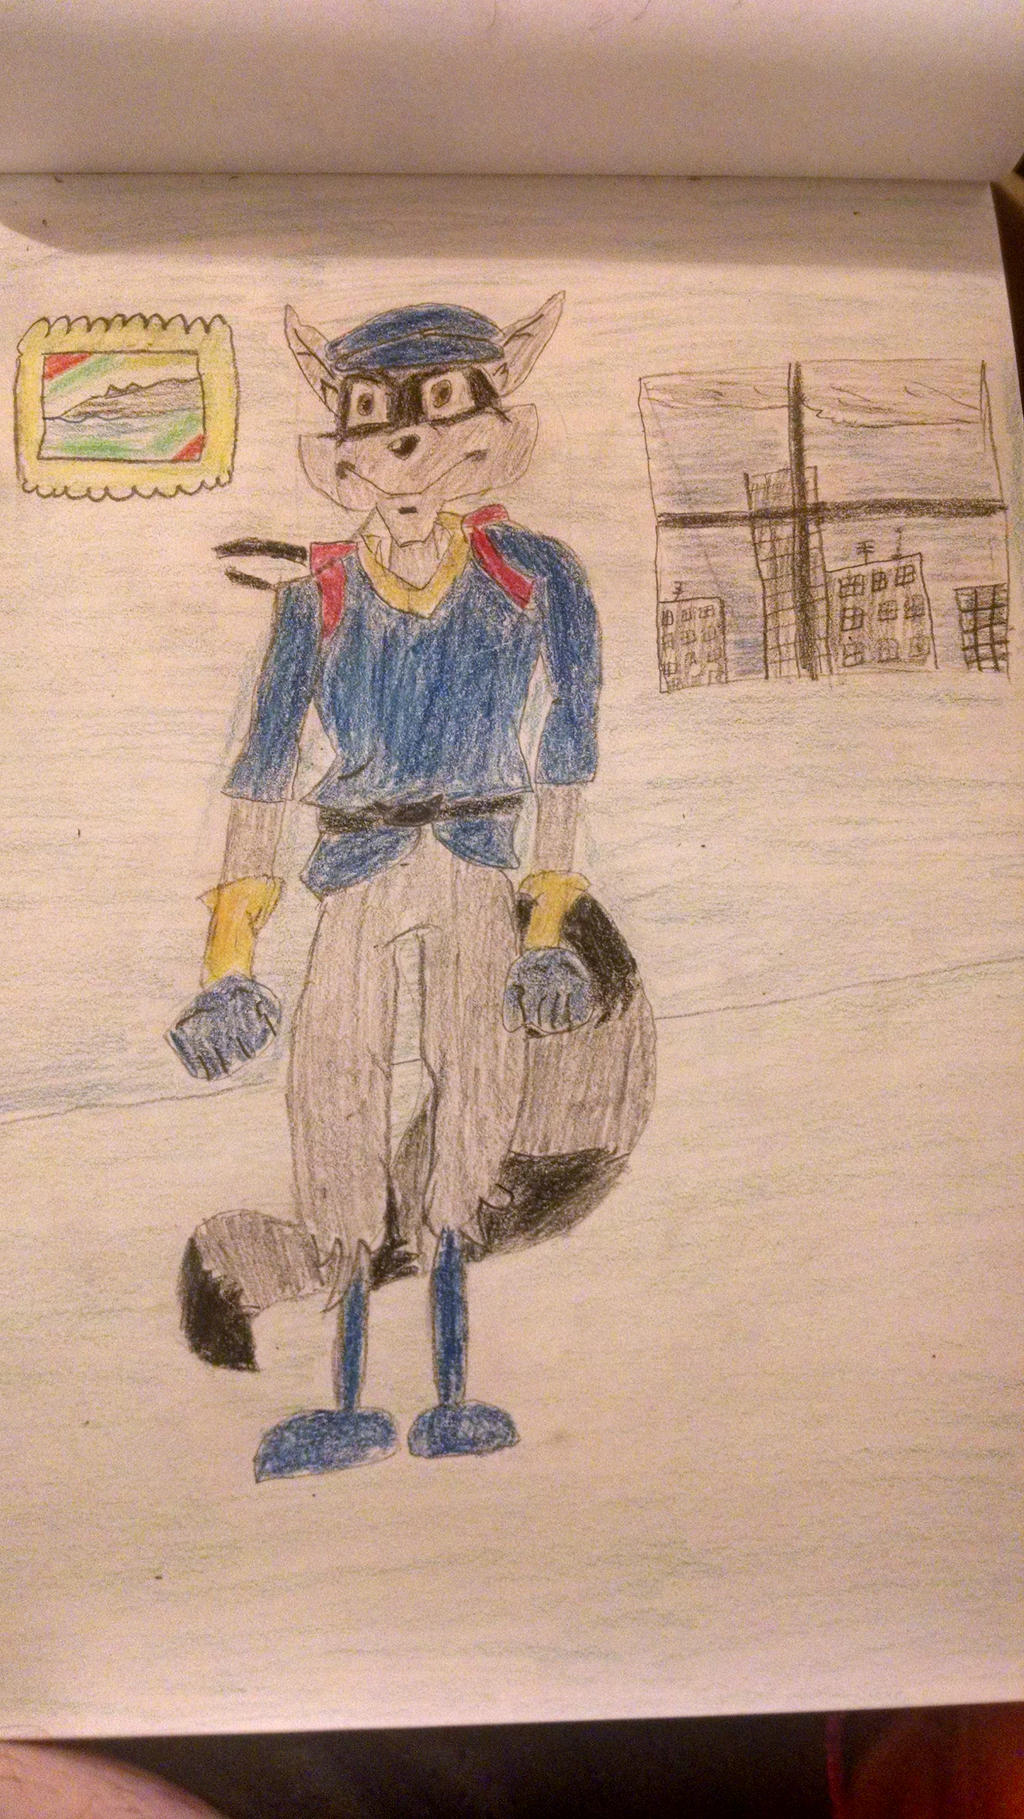 Sly Cooper and the minimum security museum.